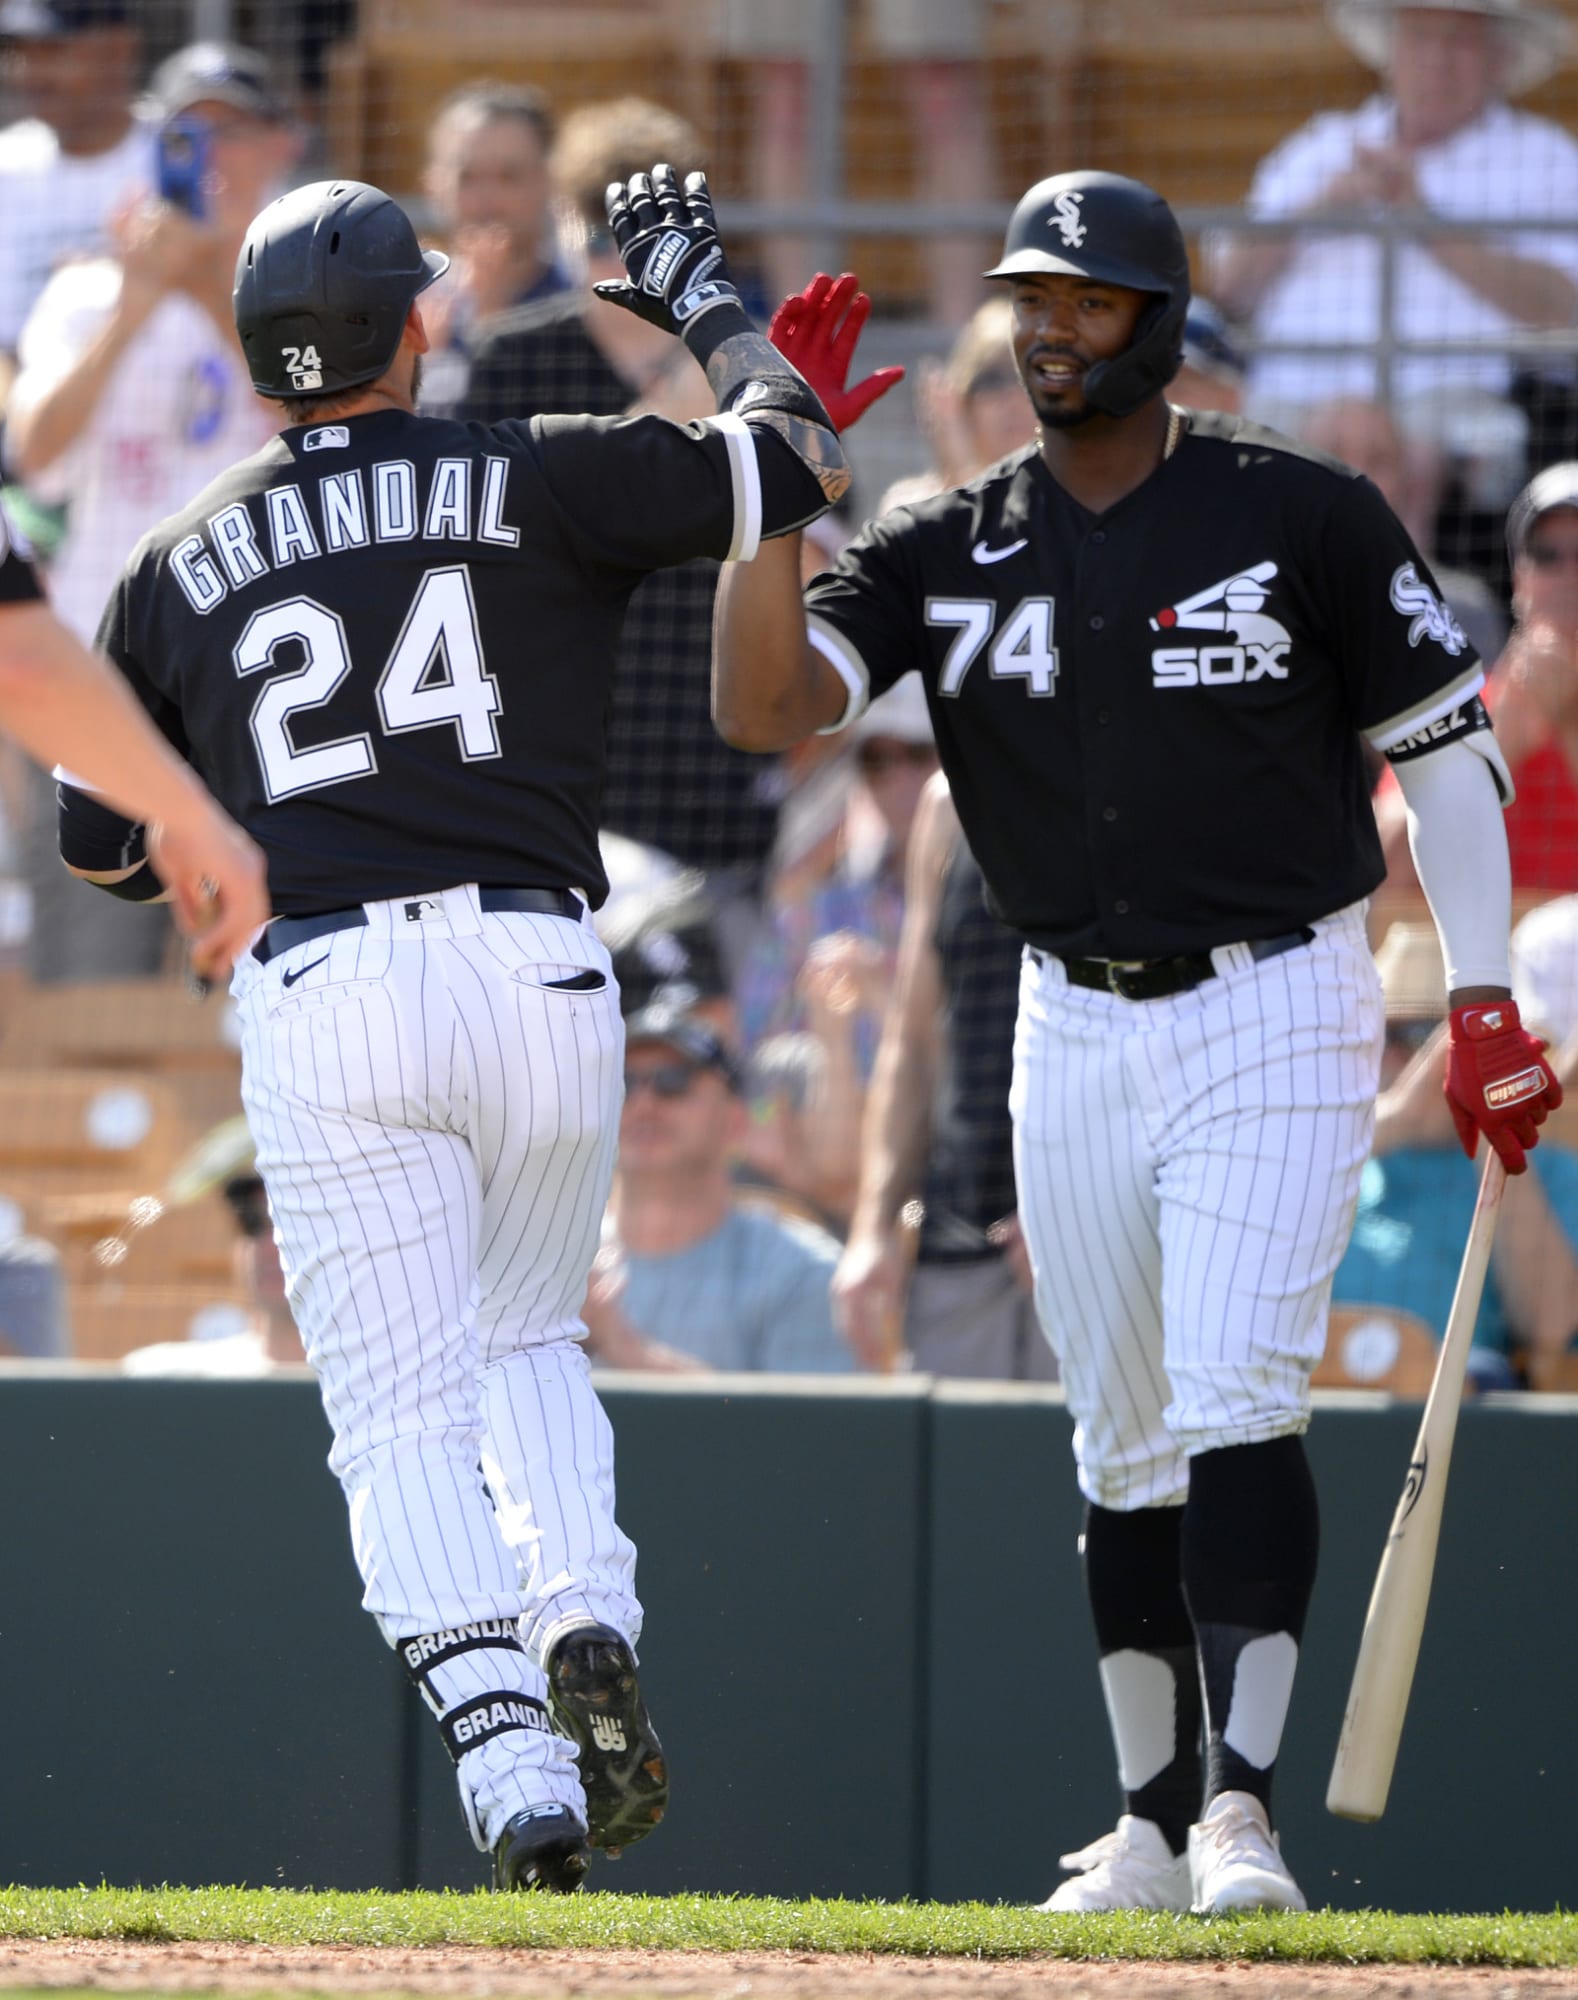 Chicago White Sox How long should new spring training be?